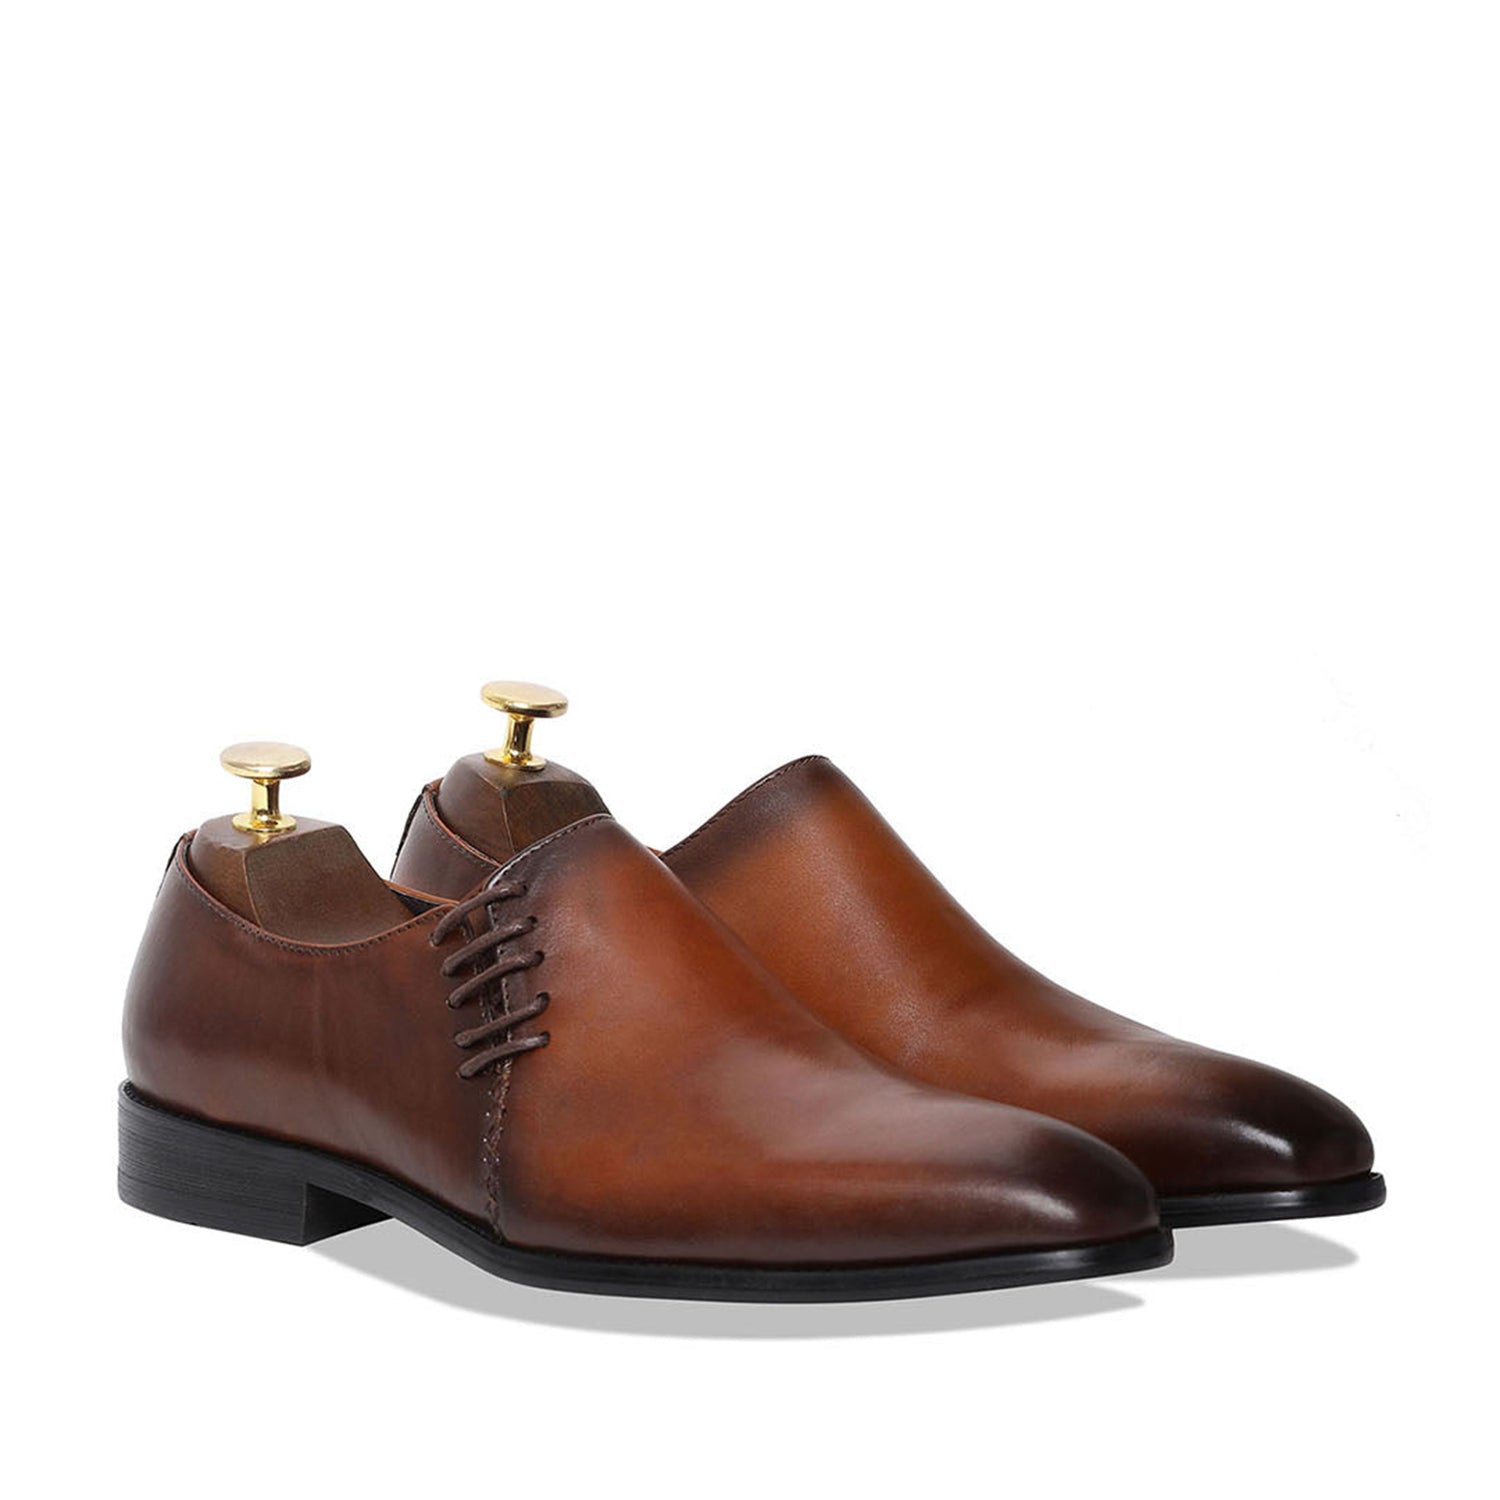 Spanish Brown Leather Shoes